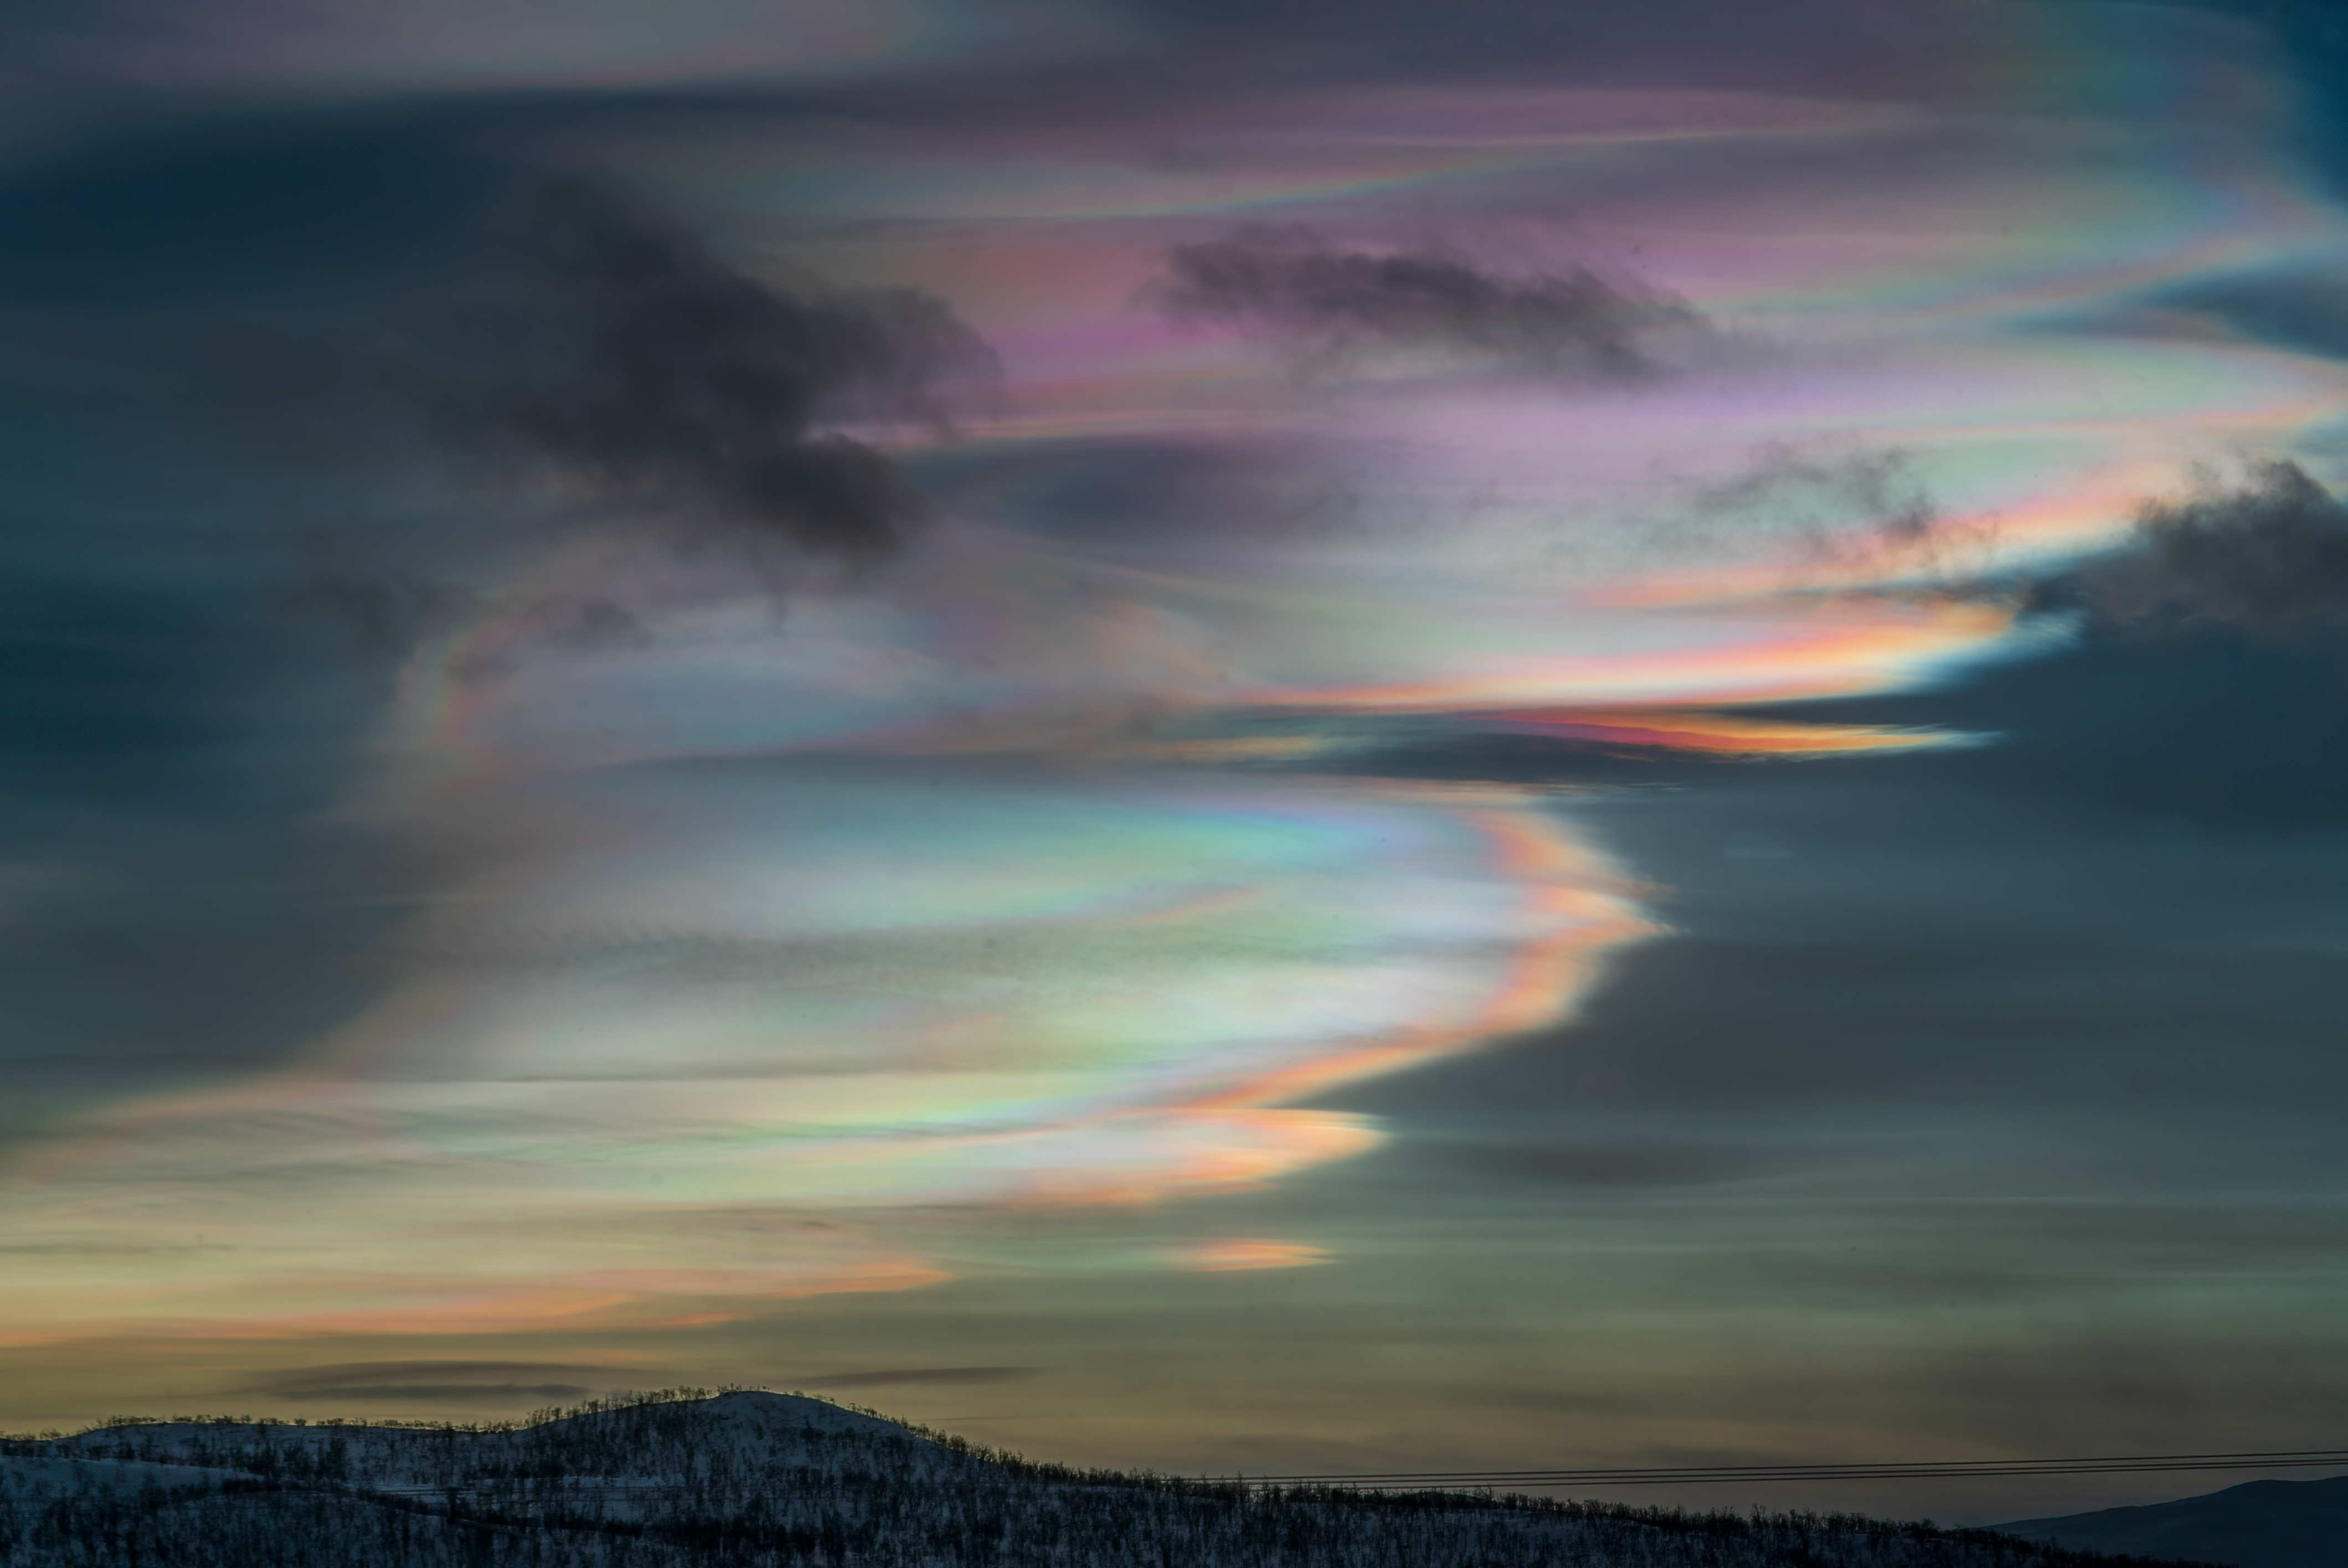 Nacreous clouds, a.k.a. mother of pearl clouds in
Finland